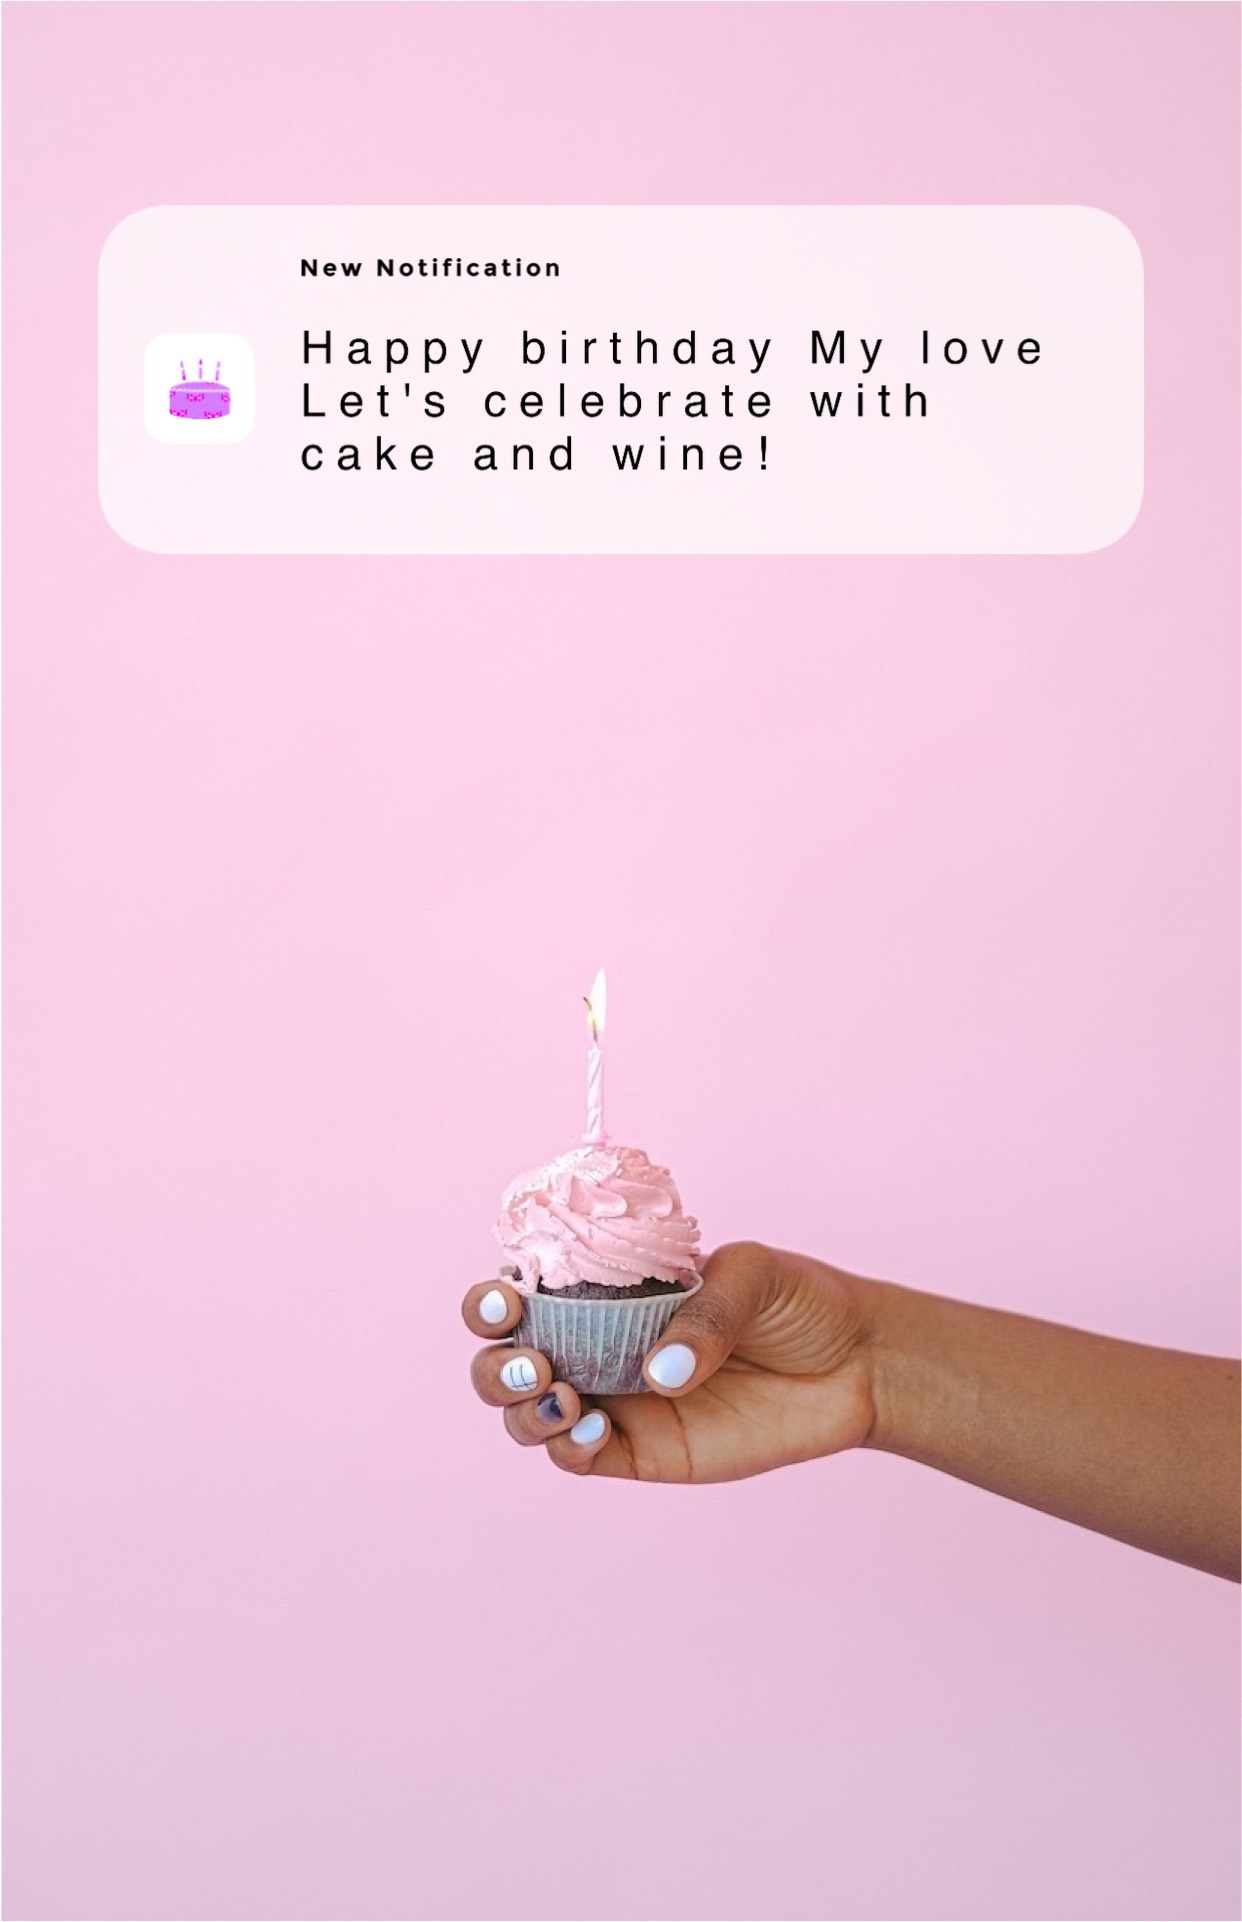 Cupcake and candle pink happy birthday template